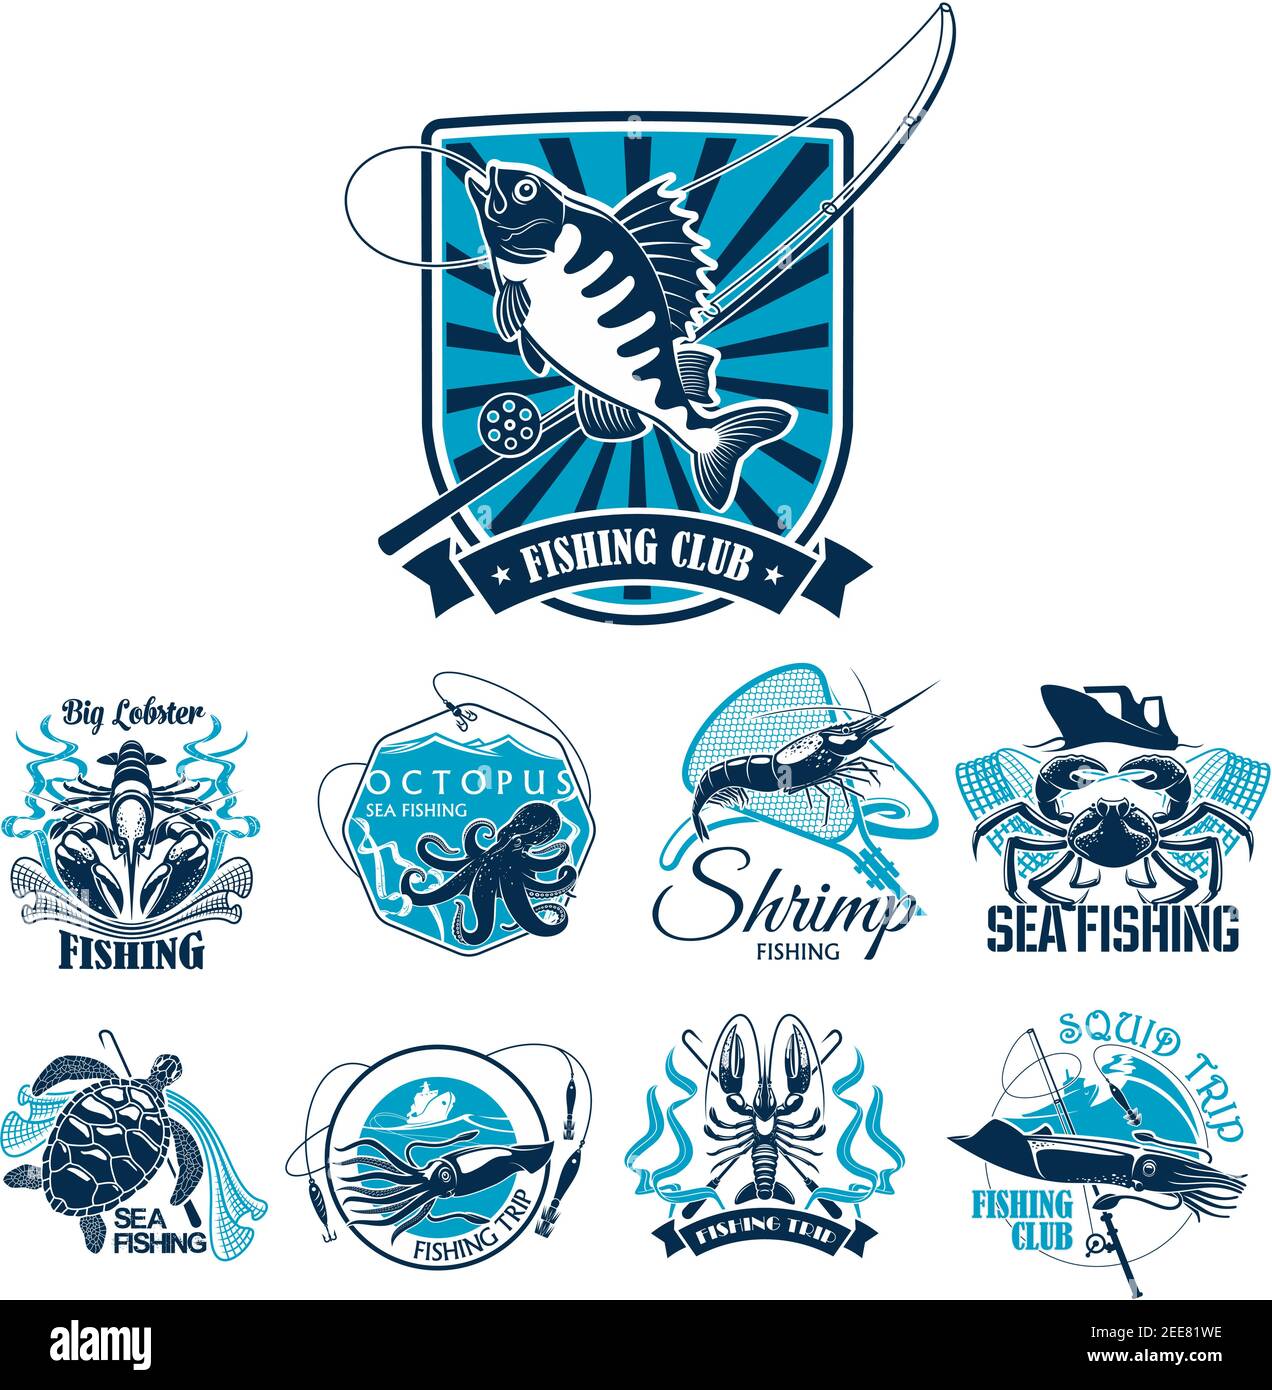 Fishing sport club and sea fishing trip badge set. Ocean fish, crab, shrimp, lobster, squid and sea turtle icon with fishing boat, net and tackle on h Stock Vector